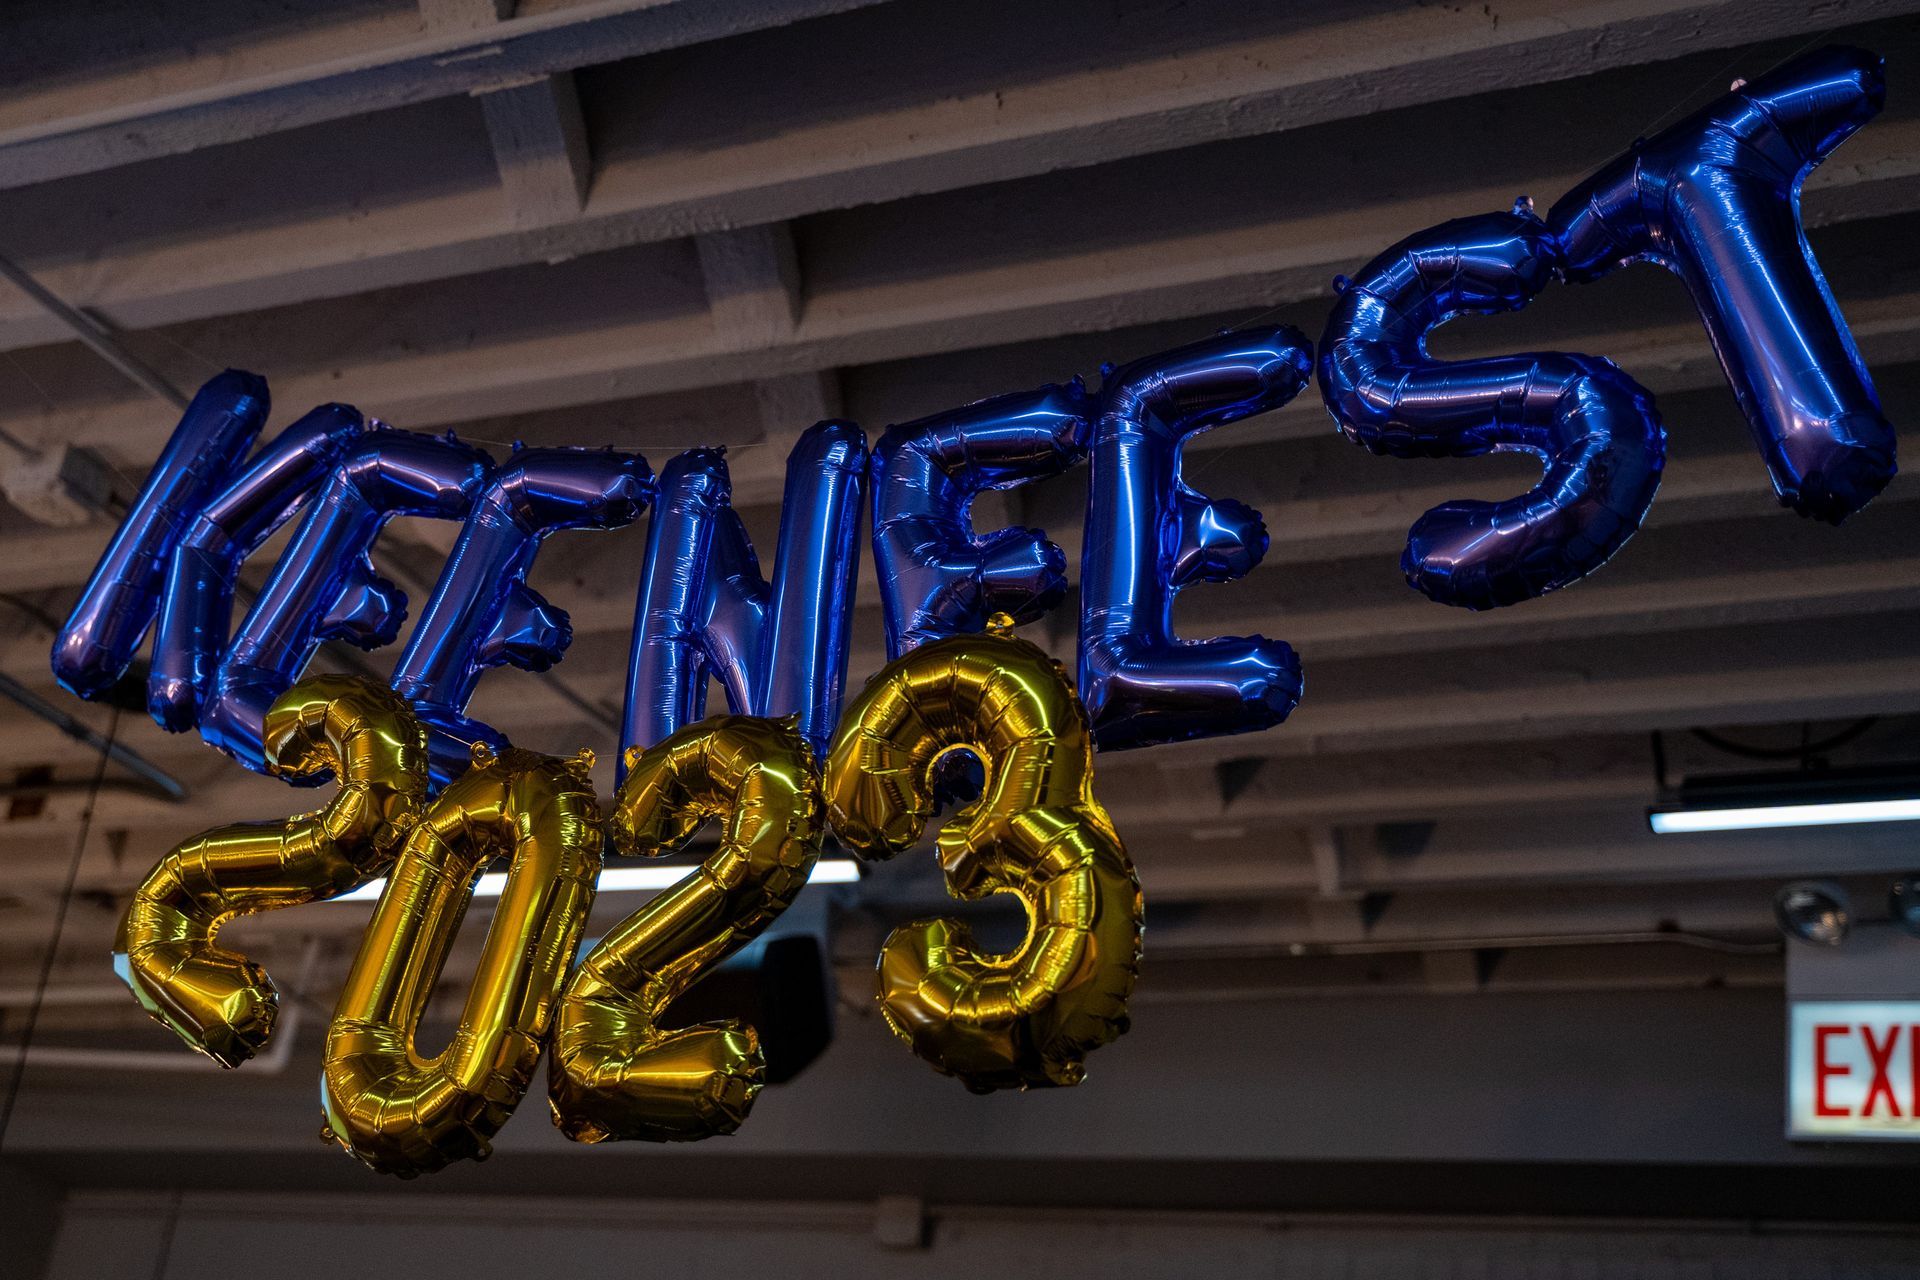 KEENFest 2023 written in balloons and hung in the venue